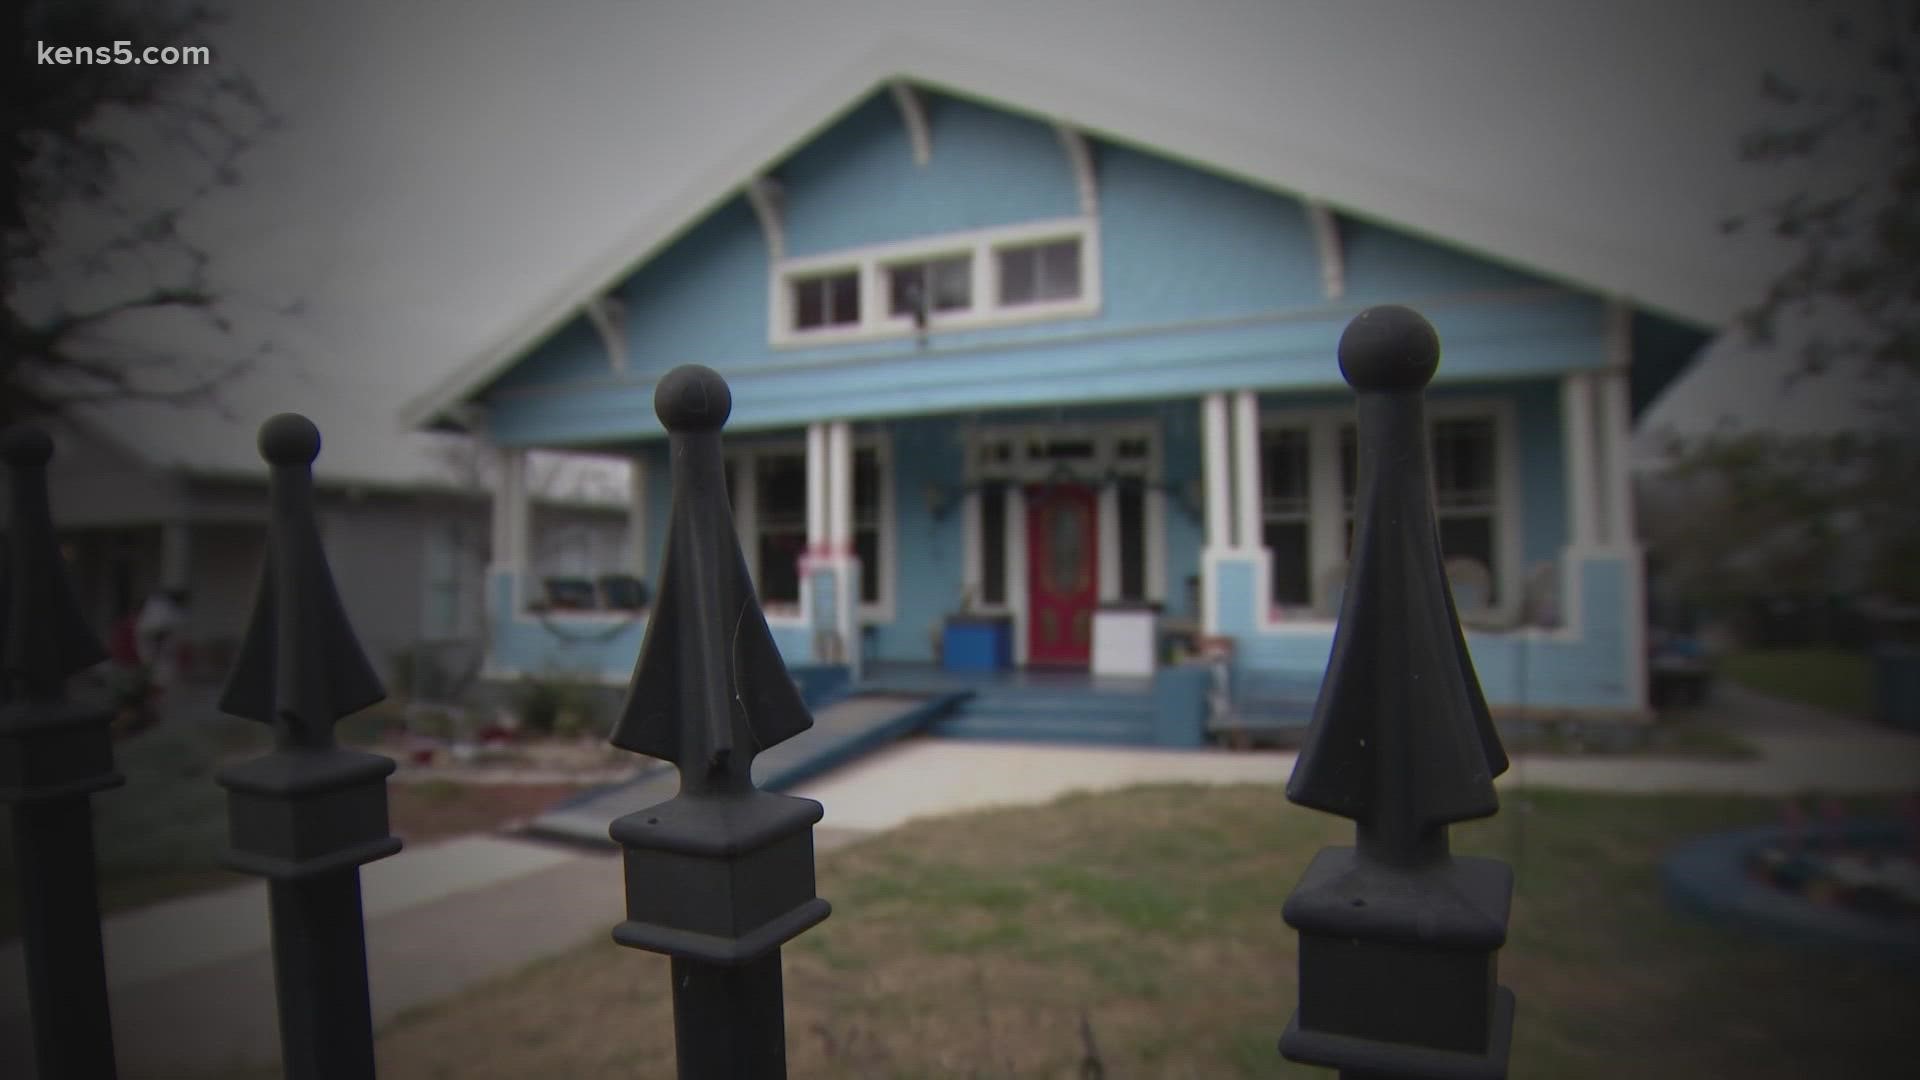 A San Antonio neighborhood has undergone a makeover, but there’s fear this change could do more harm than good.